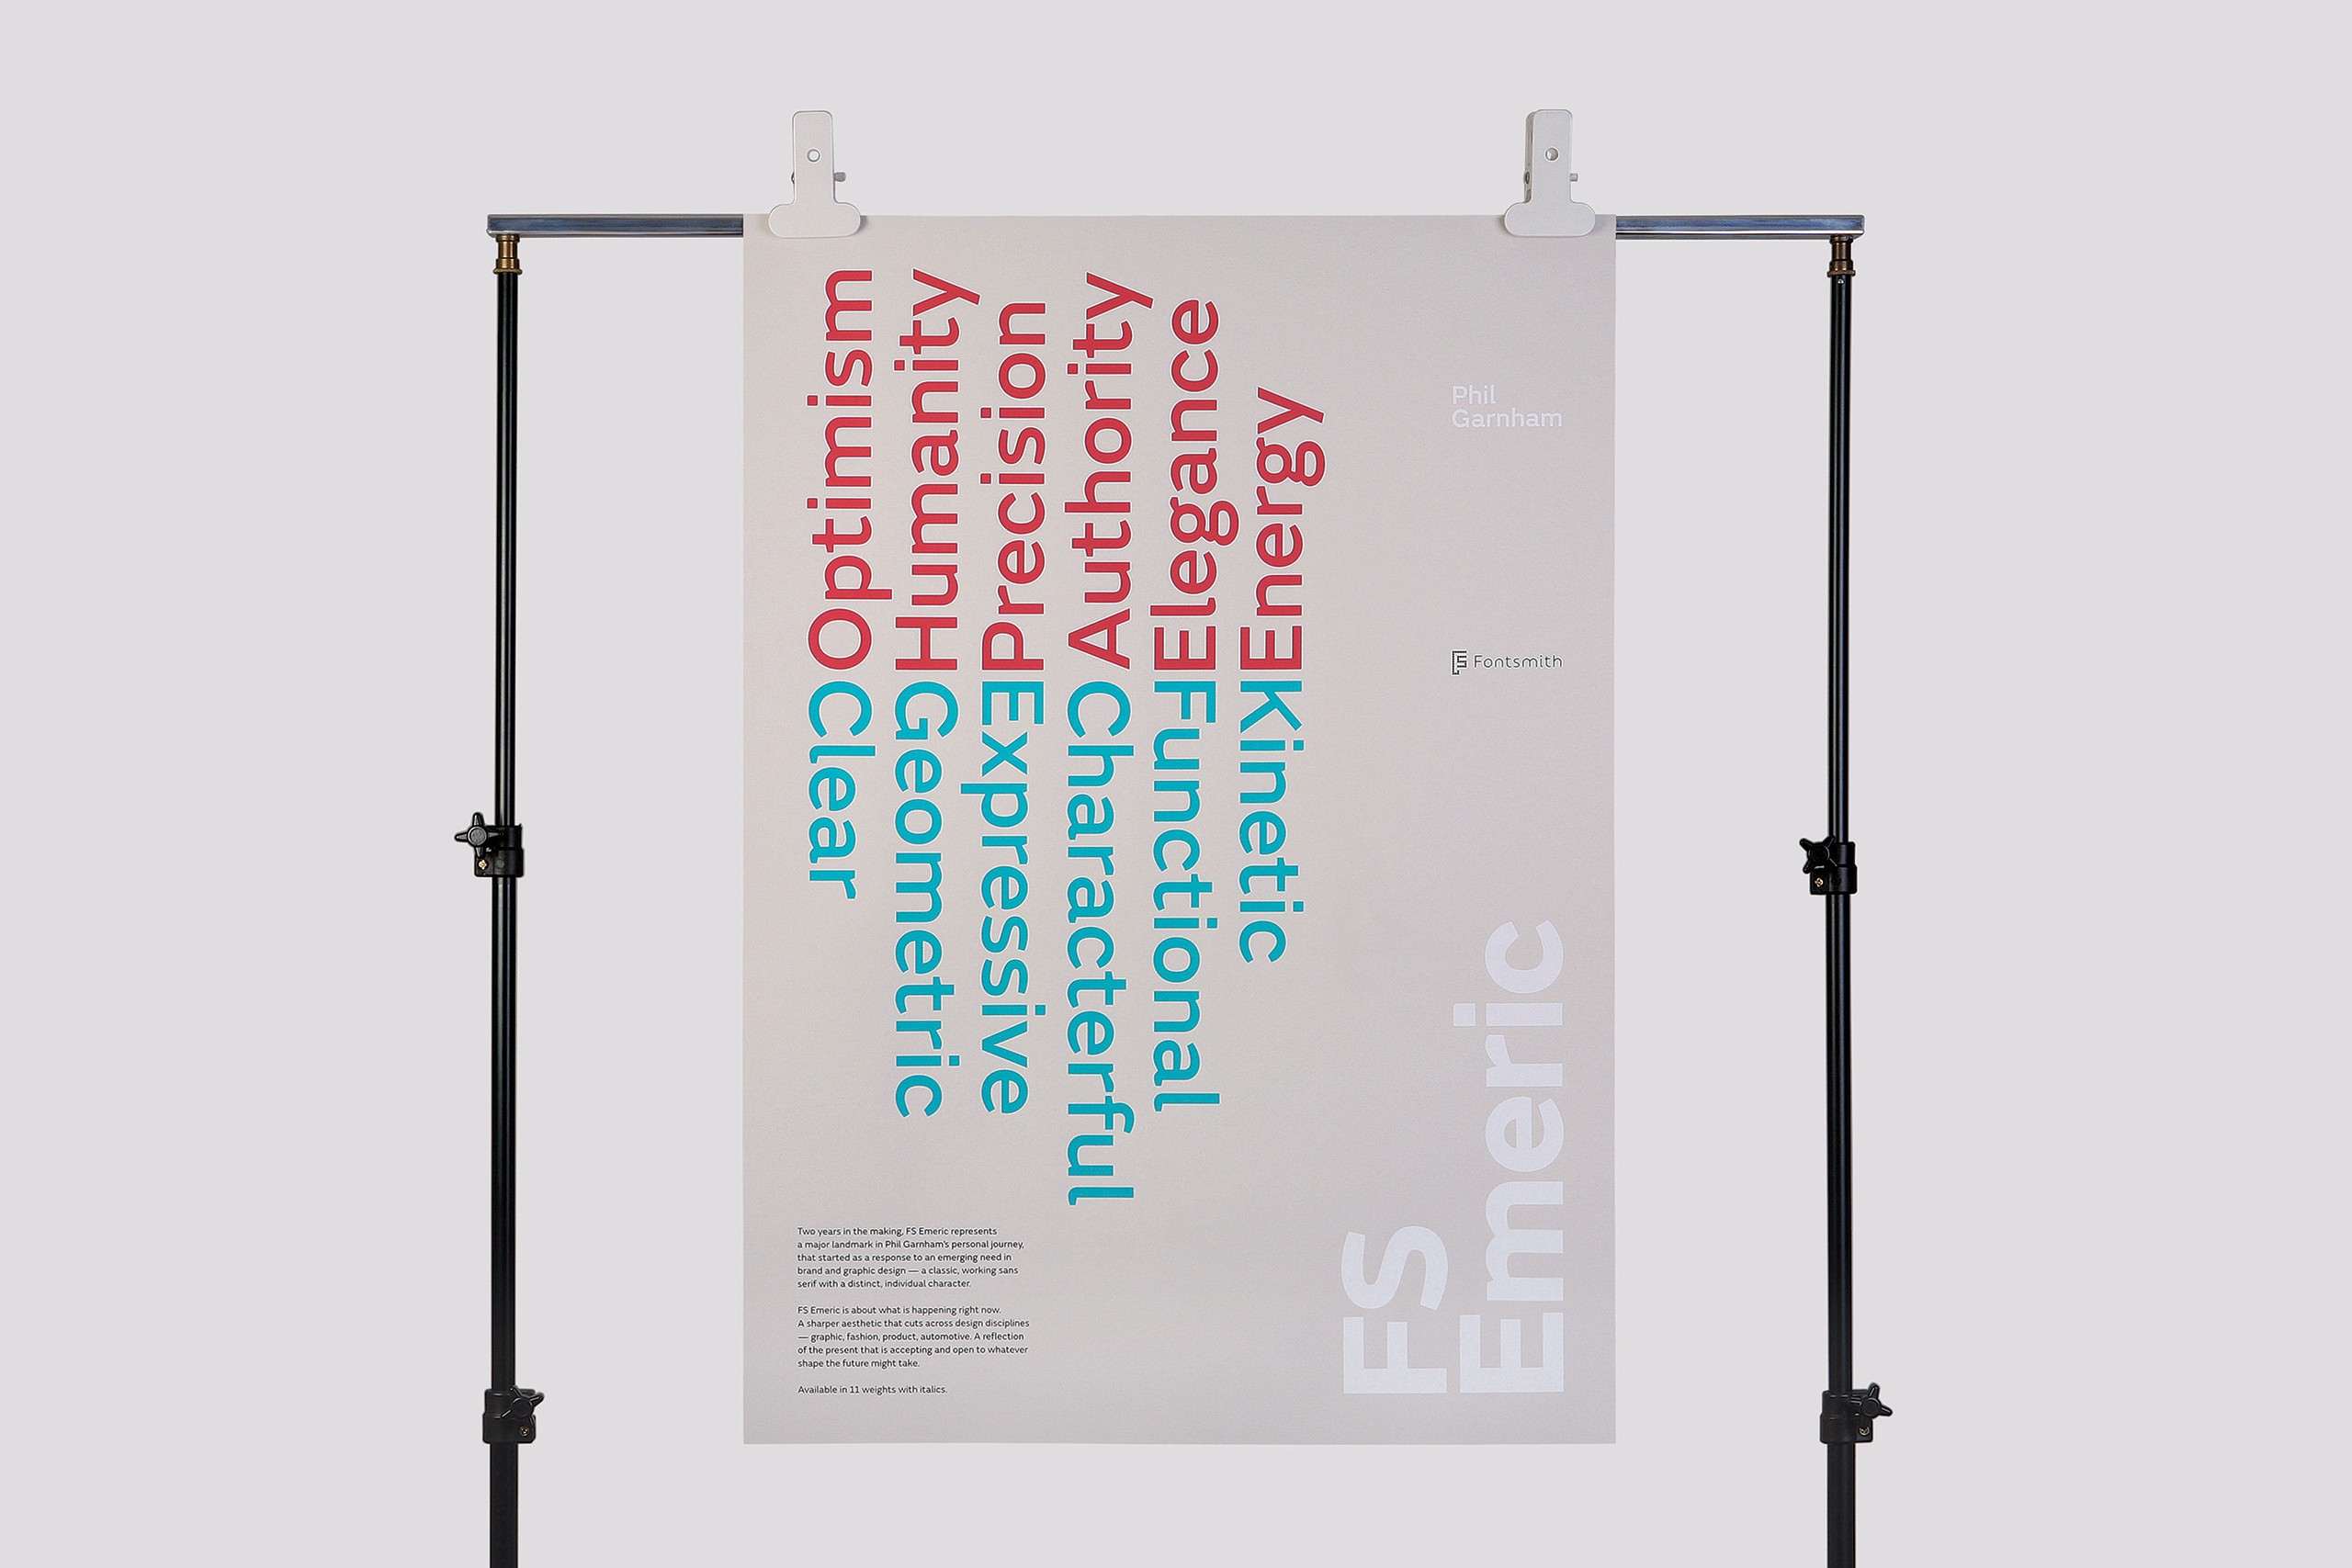 Fontsmith - FS Emeric launch campaign and poster series